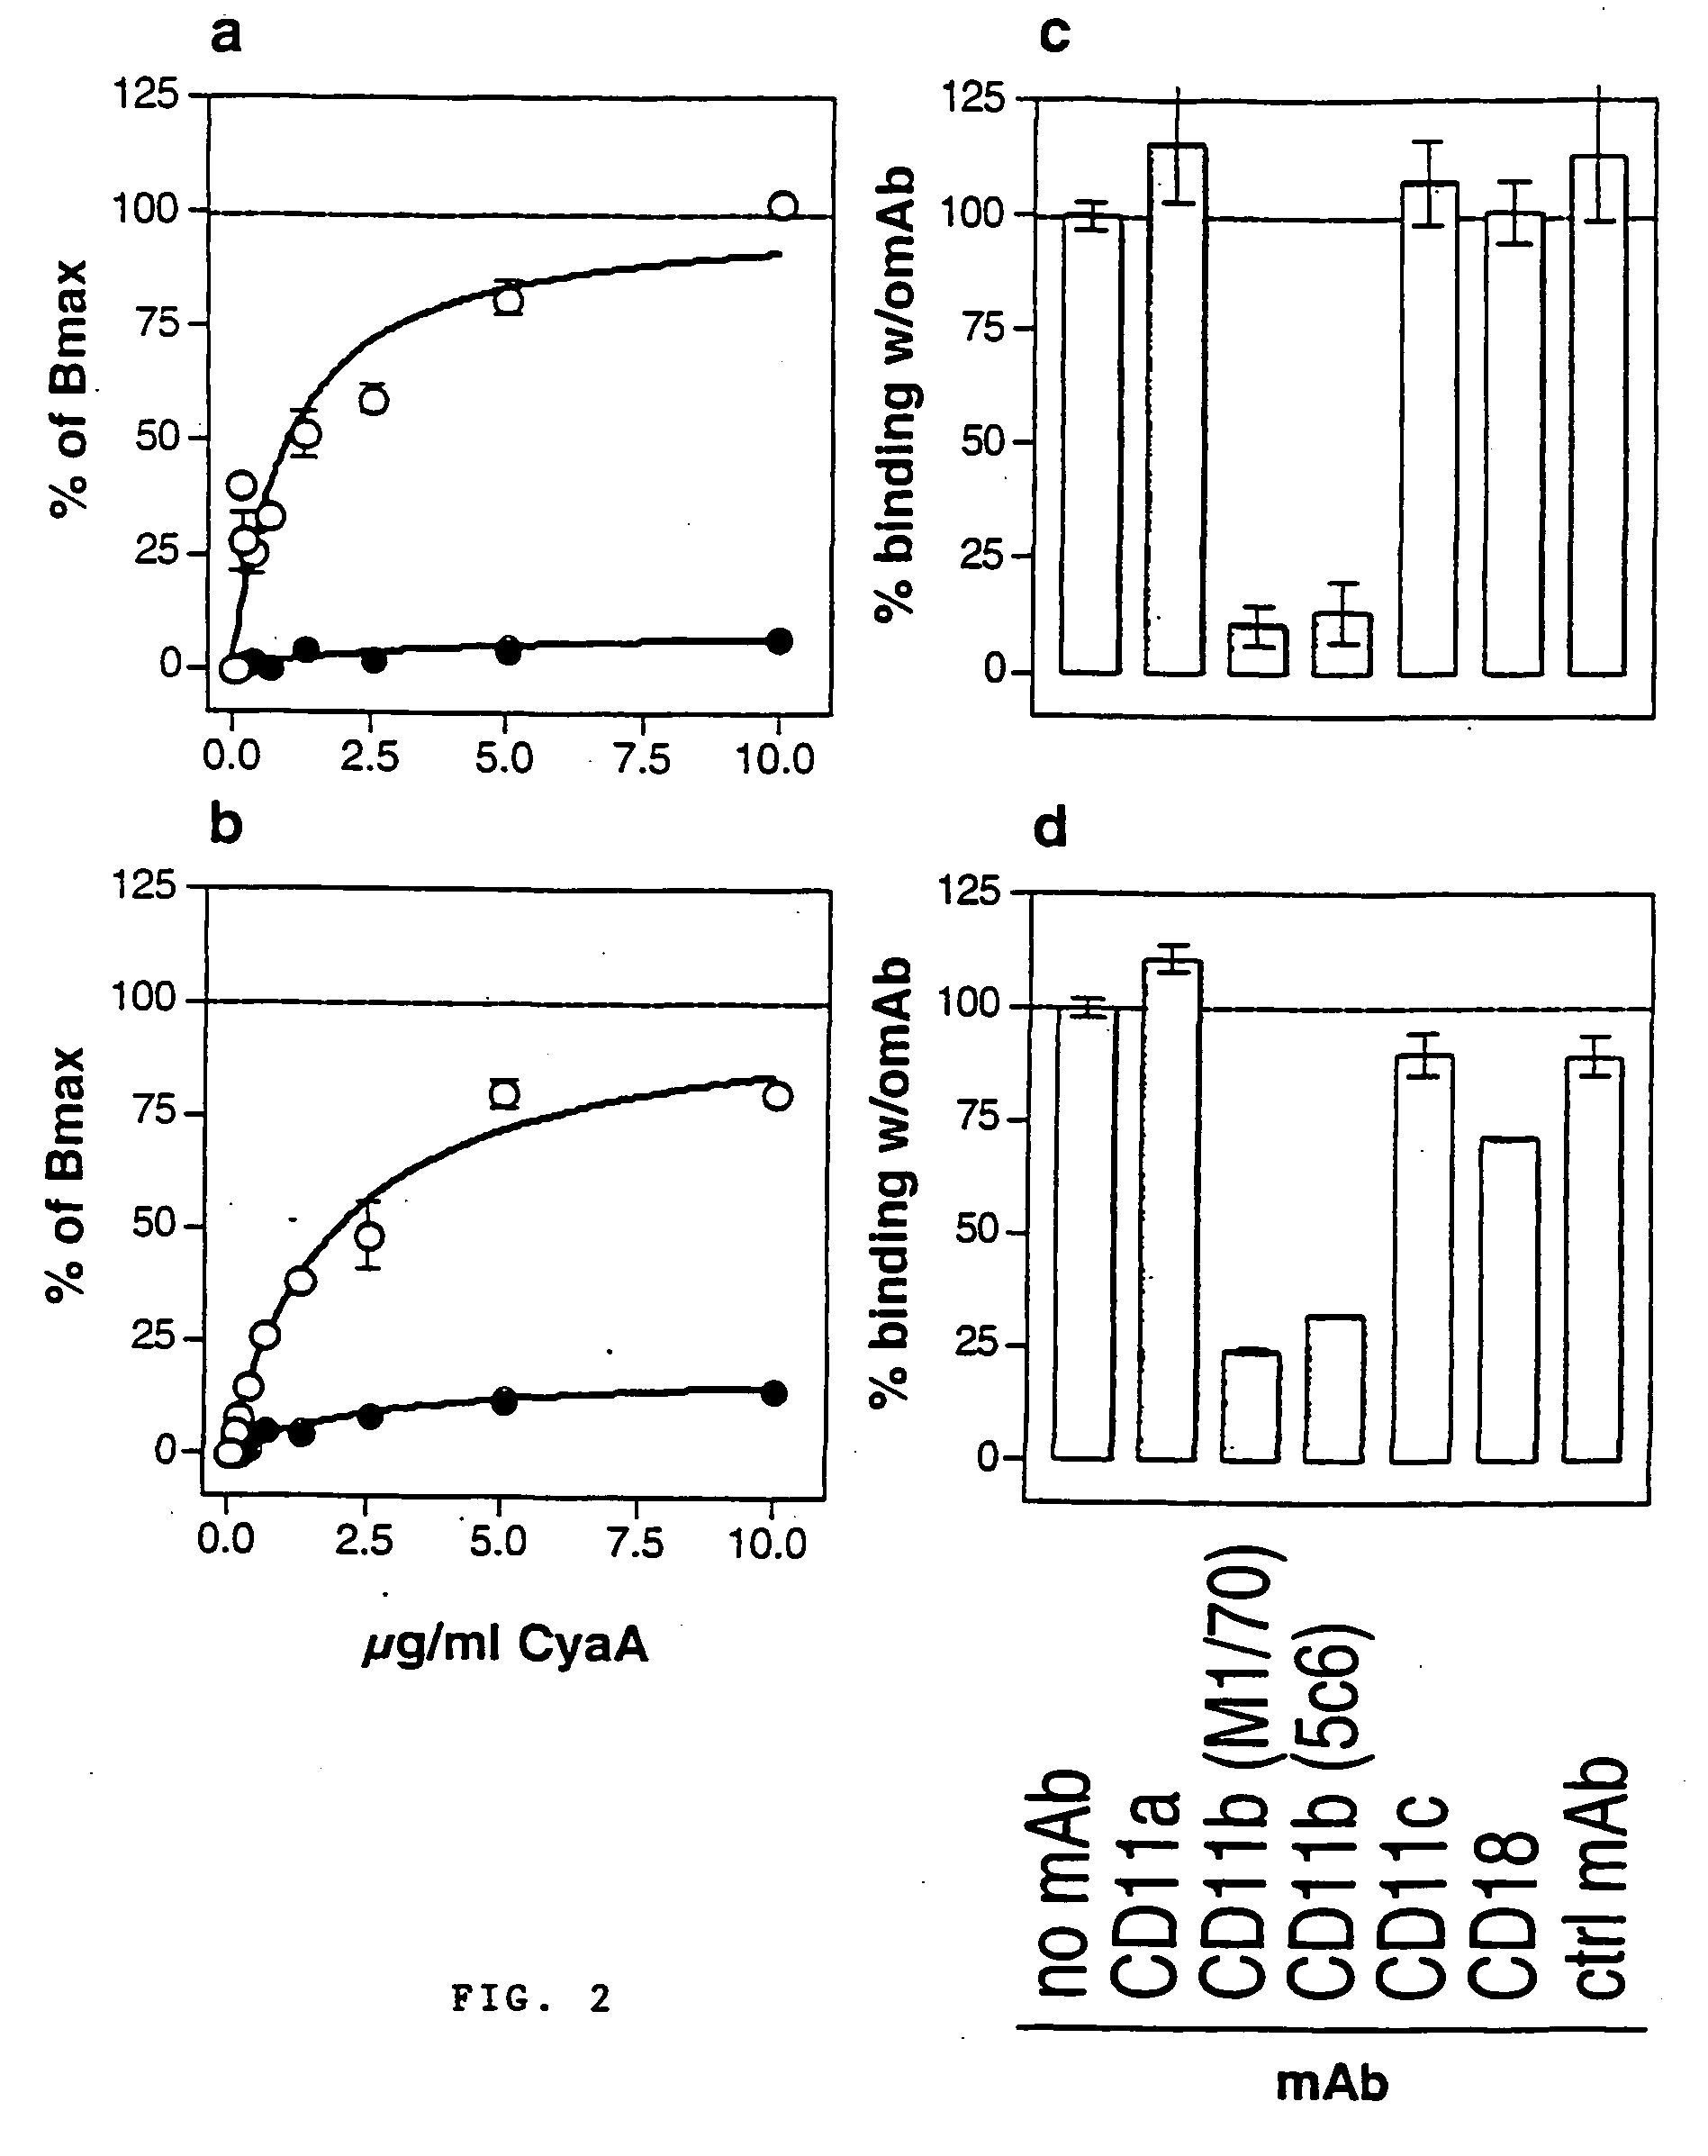 Vectors for molecule delivery to CD11b expressing cells